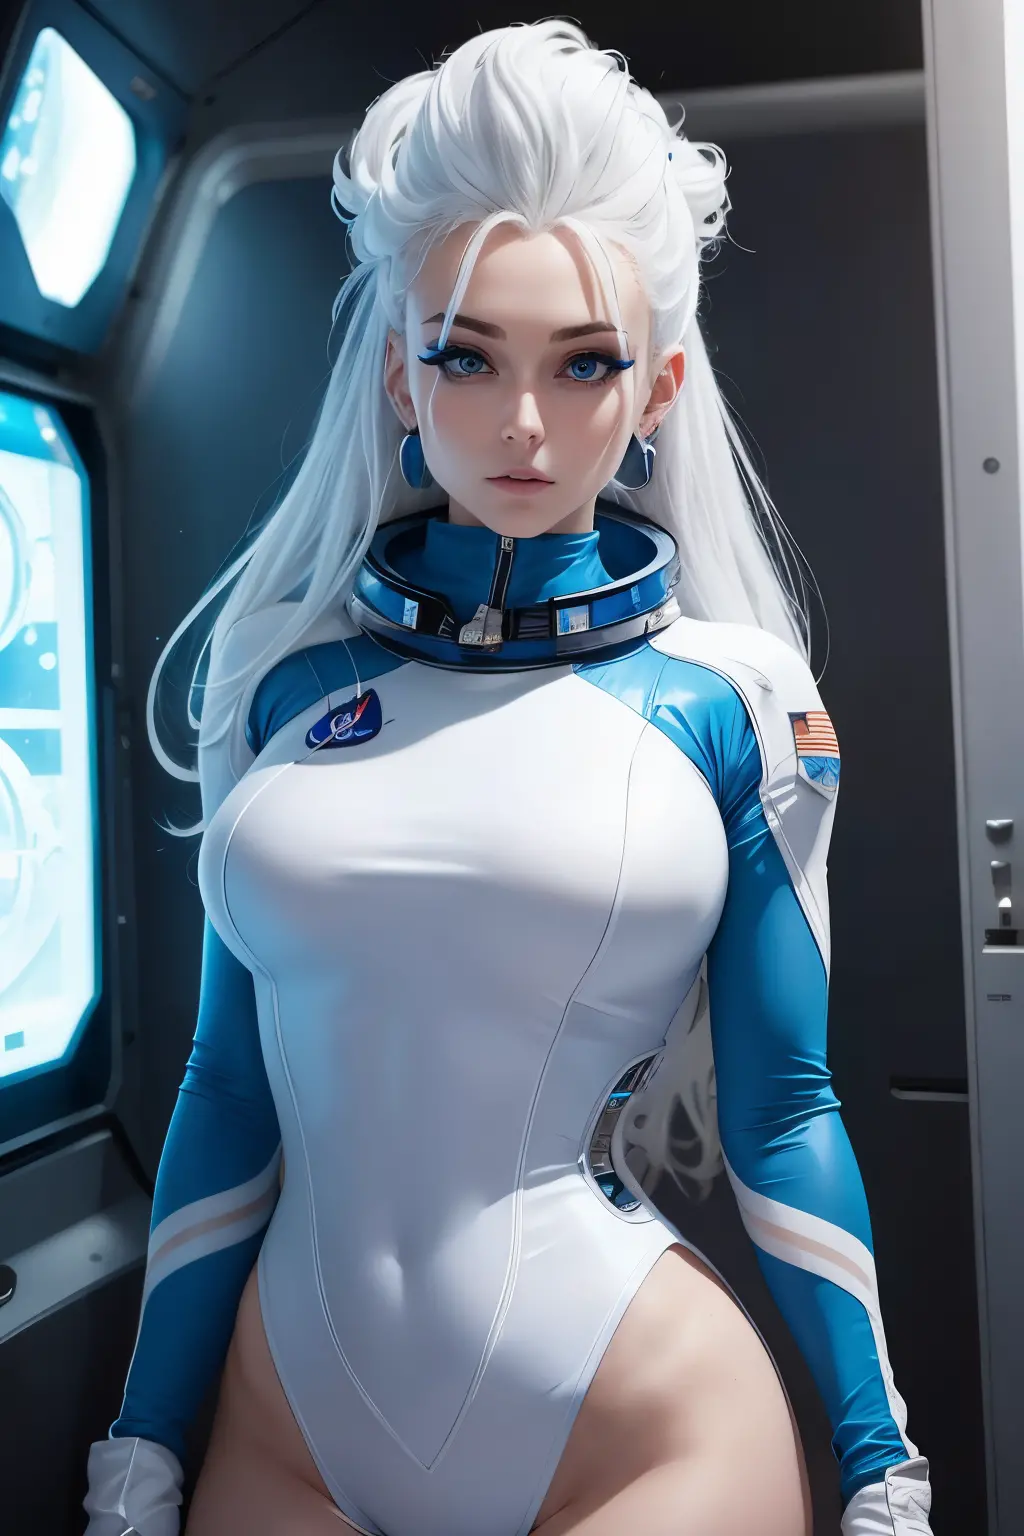 Victoria, the stunning 22-year-old with white hair and piercing blue eyes, stood tall in her tight astronaut costume, her body a...